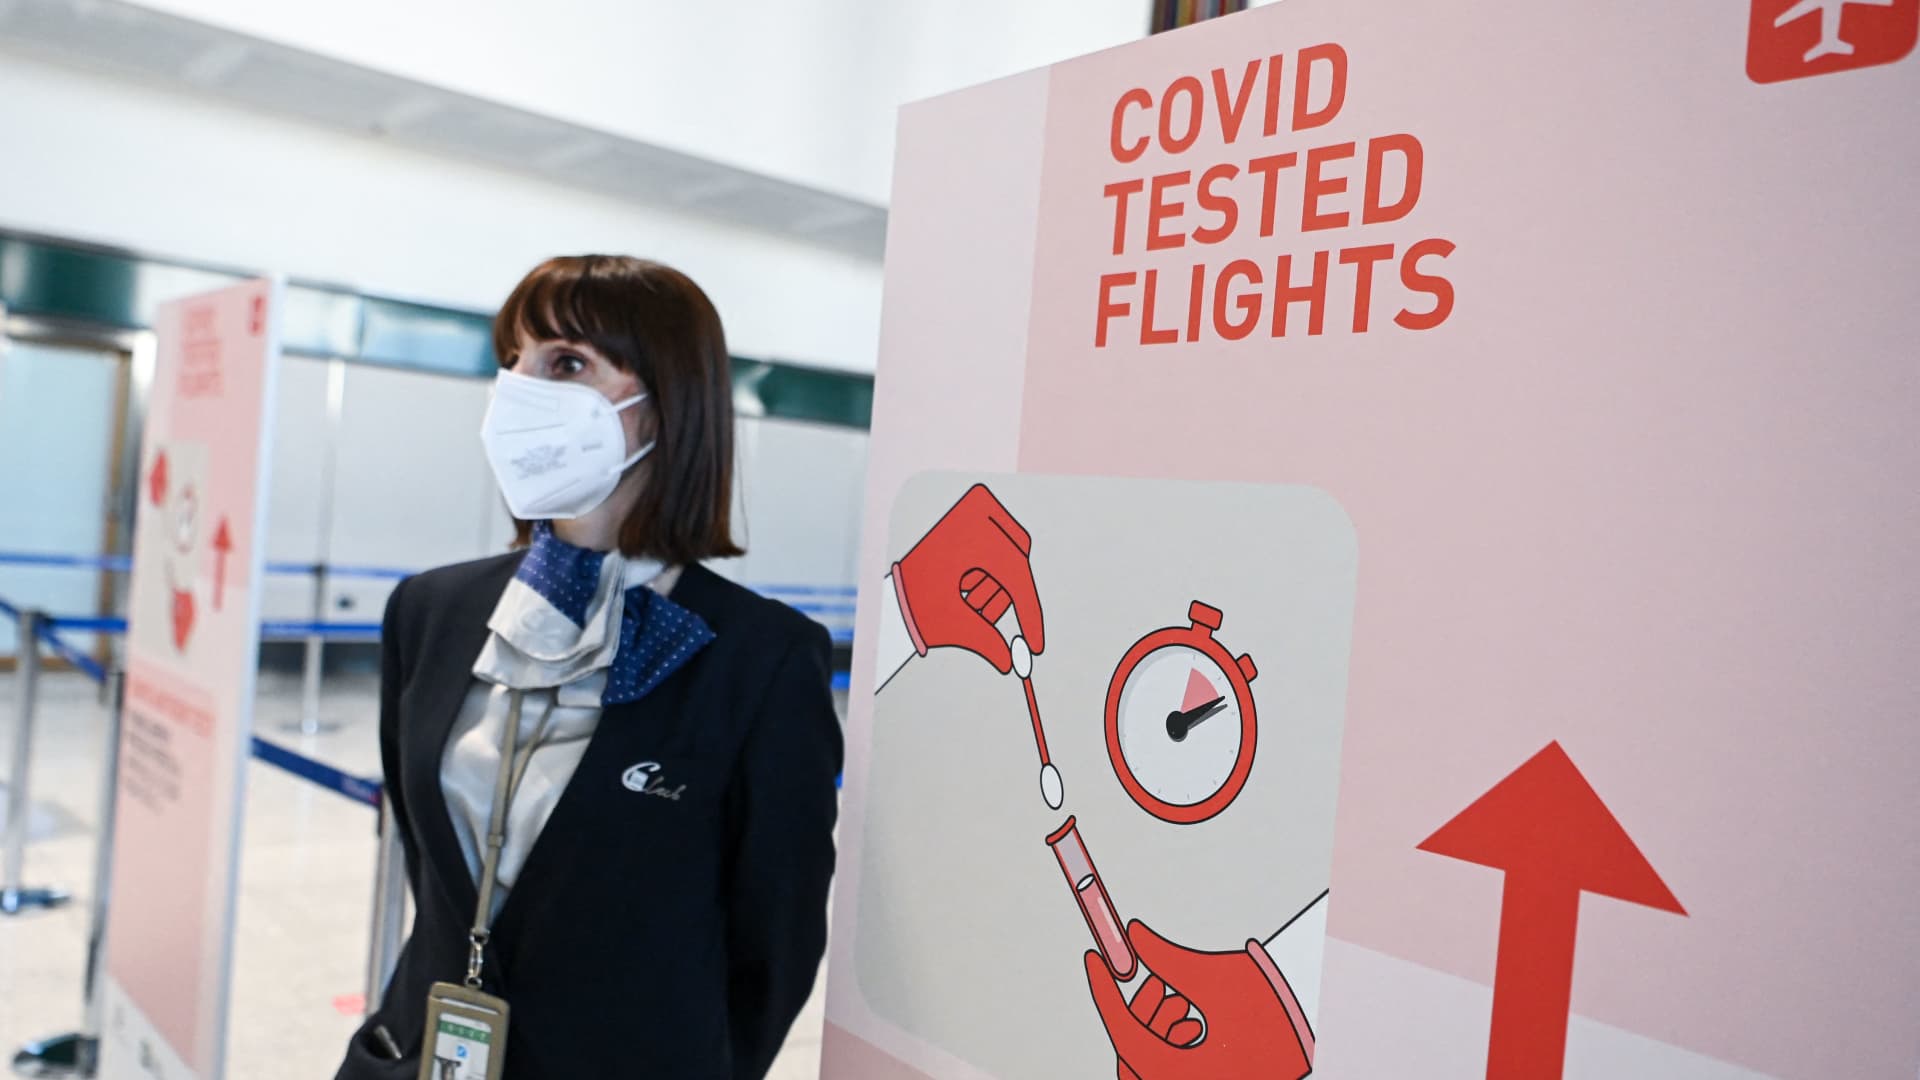 An airport hostess waits to assist passengers going through a rapid Covid-19 testing area at Malpensa Airport in Milan, Italy, on April 2, 2021.